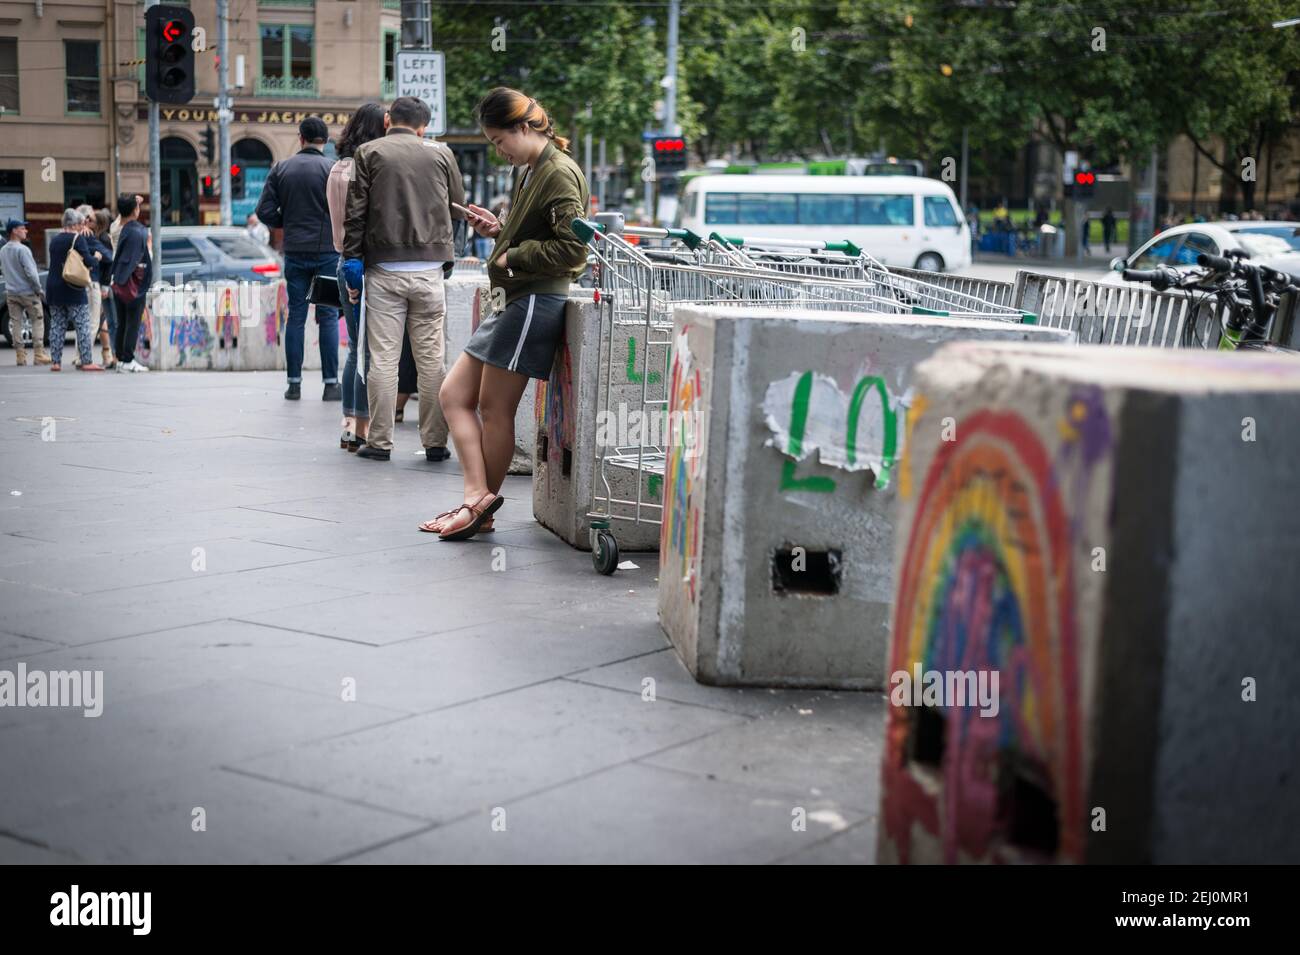 A young woman checks her phone outside Flinders Street Station, Melbourne, Victoria, Australia. Stock Photo